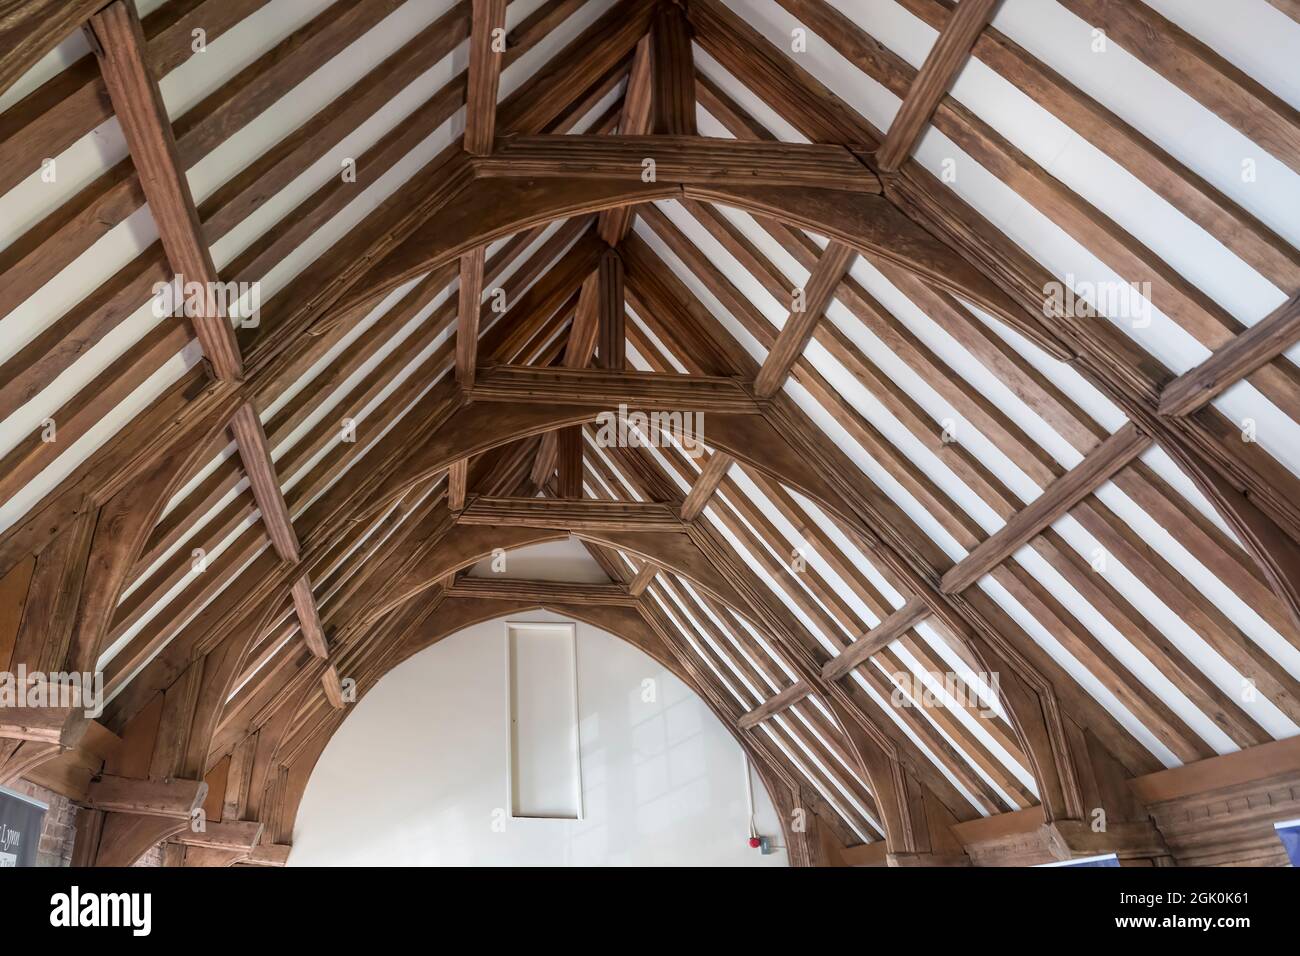 The trussed hammer beam roof to the Great Hall of Thoresby College, King's Lynn. Norfolk.  Details in Description. Stock Photo